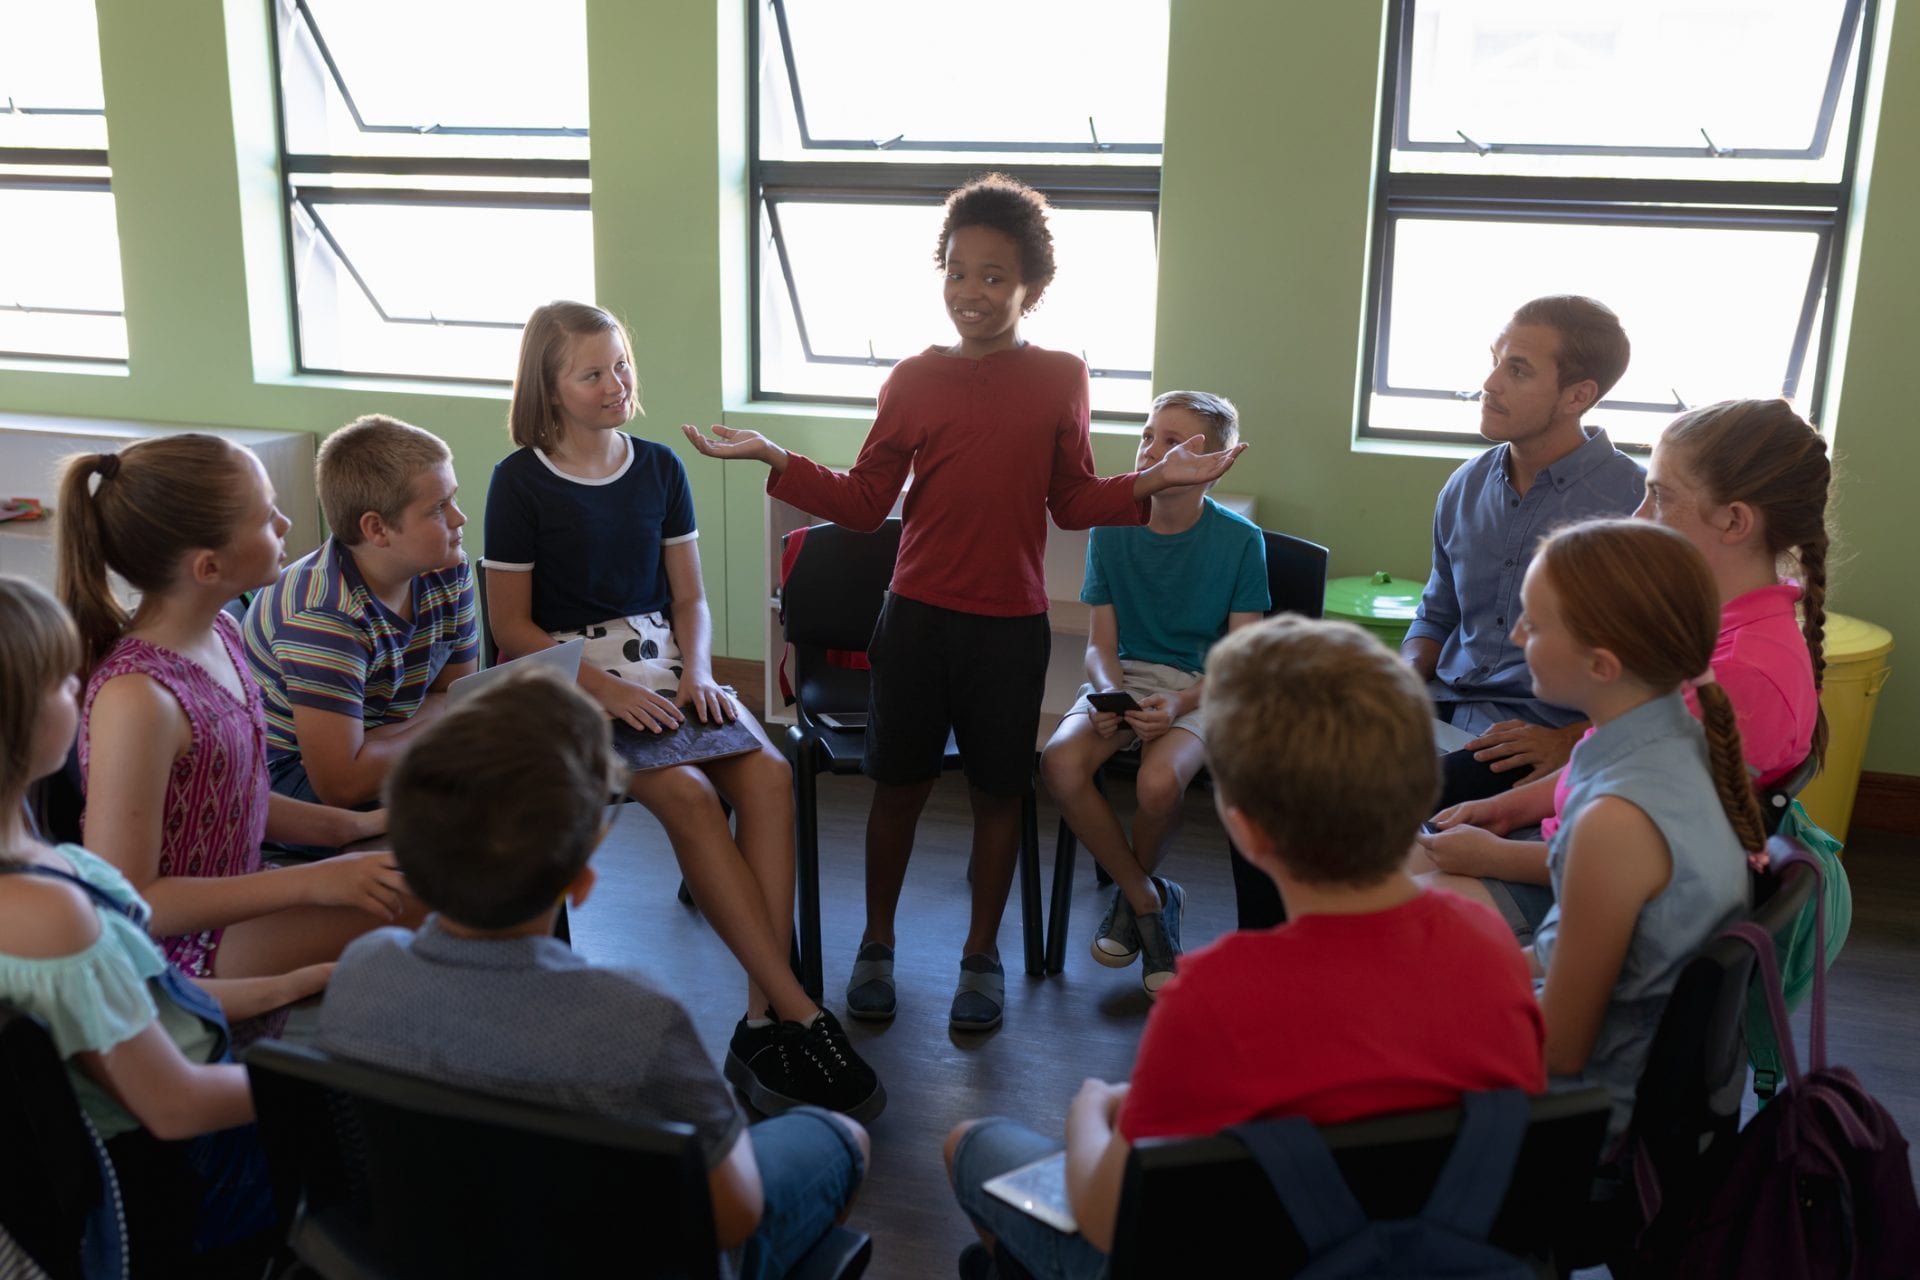 Front view of a diverse group of elementary school kids sitting on chairs in a circle and interacting during a lesson, one African American girl standing and talking while her classmates and male Caucasian teacher sit and listen